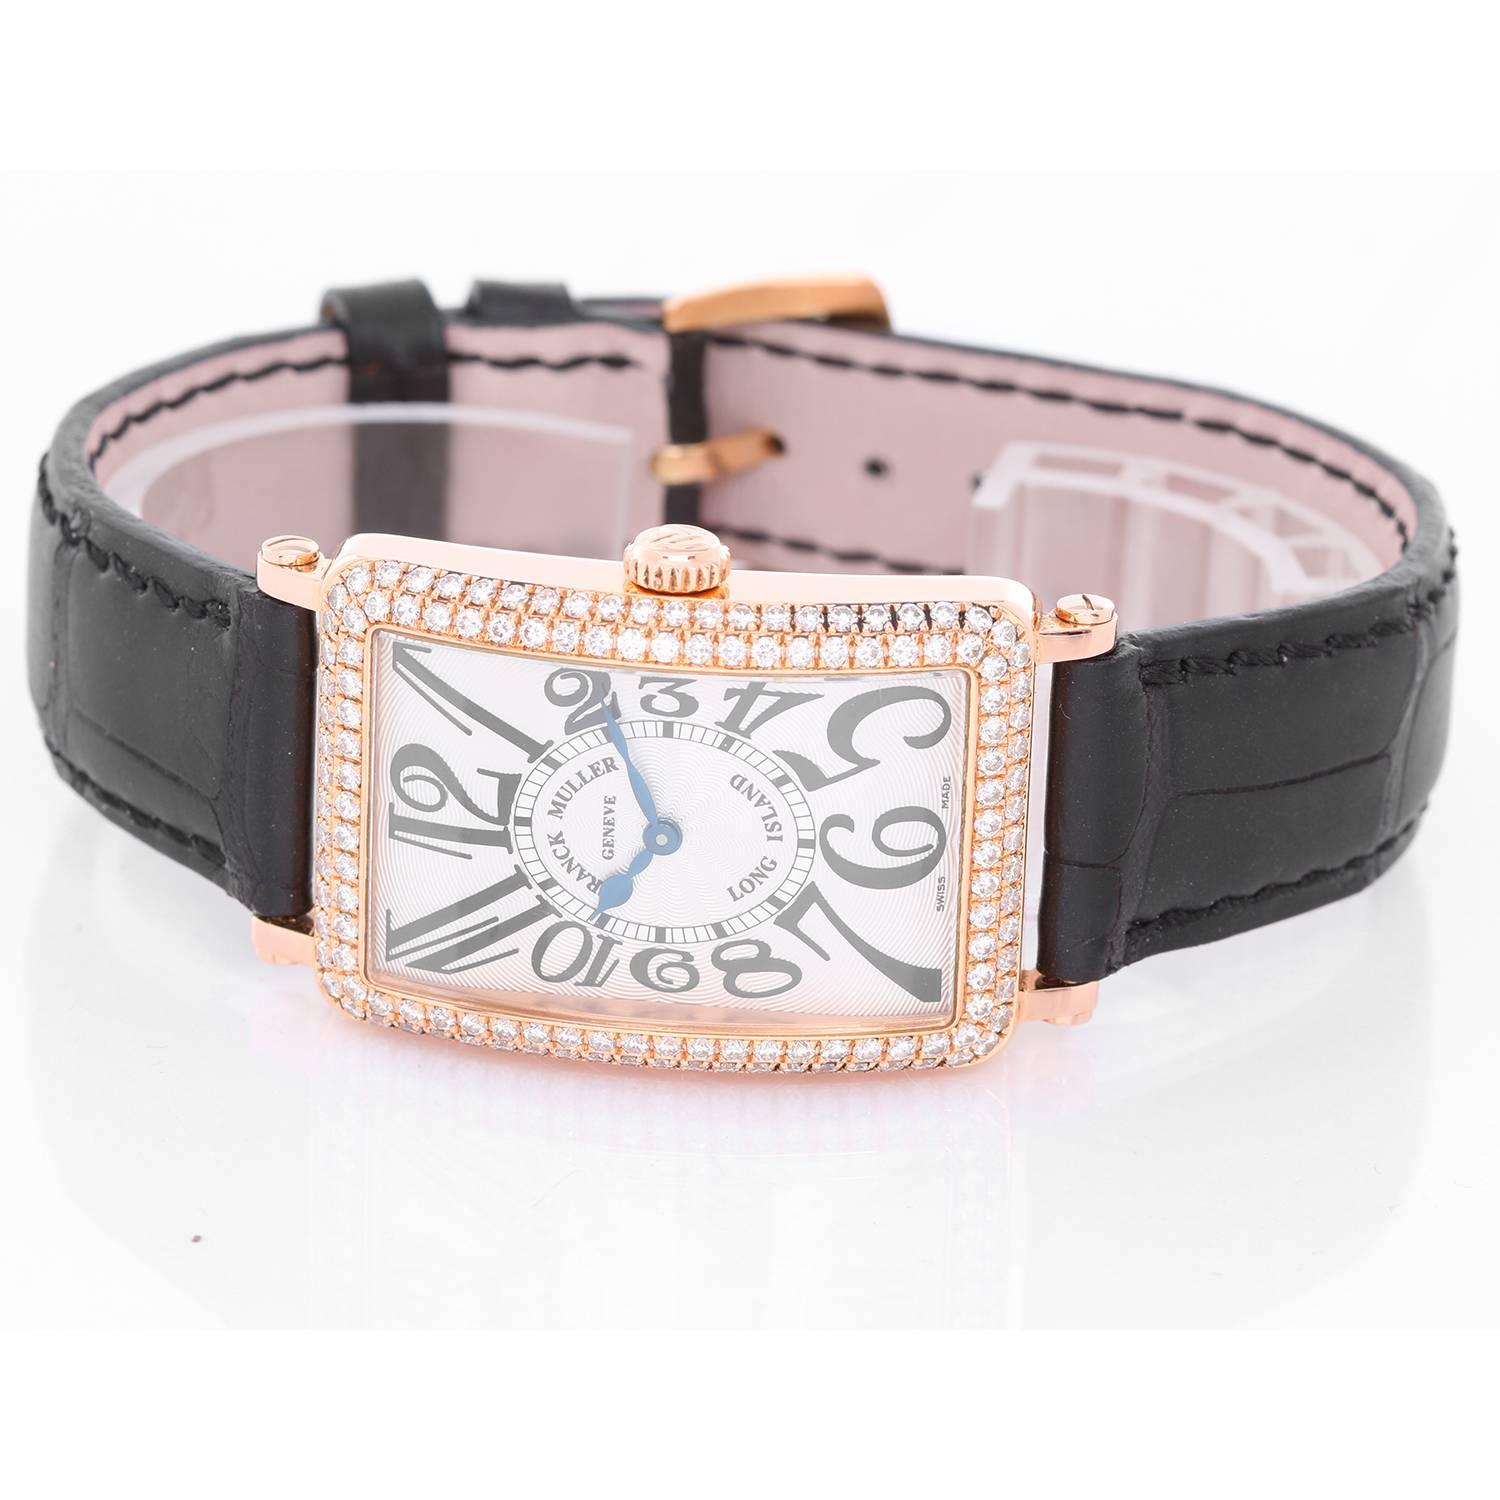 Franck Muller Long Island 18K Rose Gold Watch -  Quartz. 18K Rose gold ( 26 x 44 mm ) with diamond bezel. .72 cts Round brilliant cut. Silvered Guilloche dial. White alligator strap with tang buckle. Pre-owned with Frank Muller box and papers.